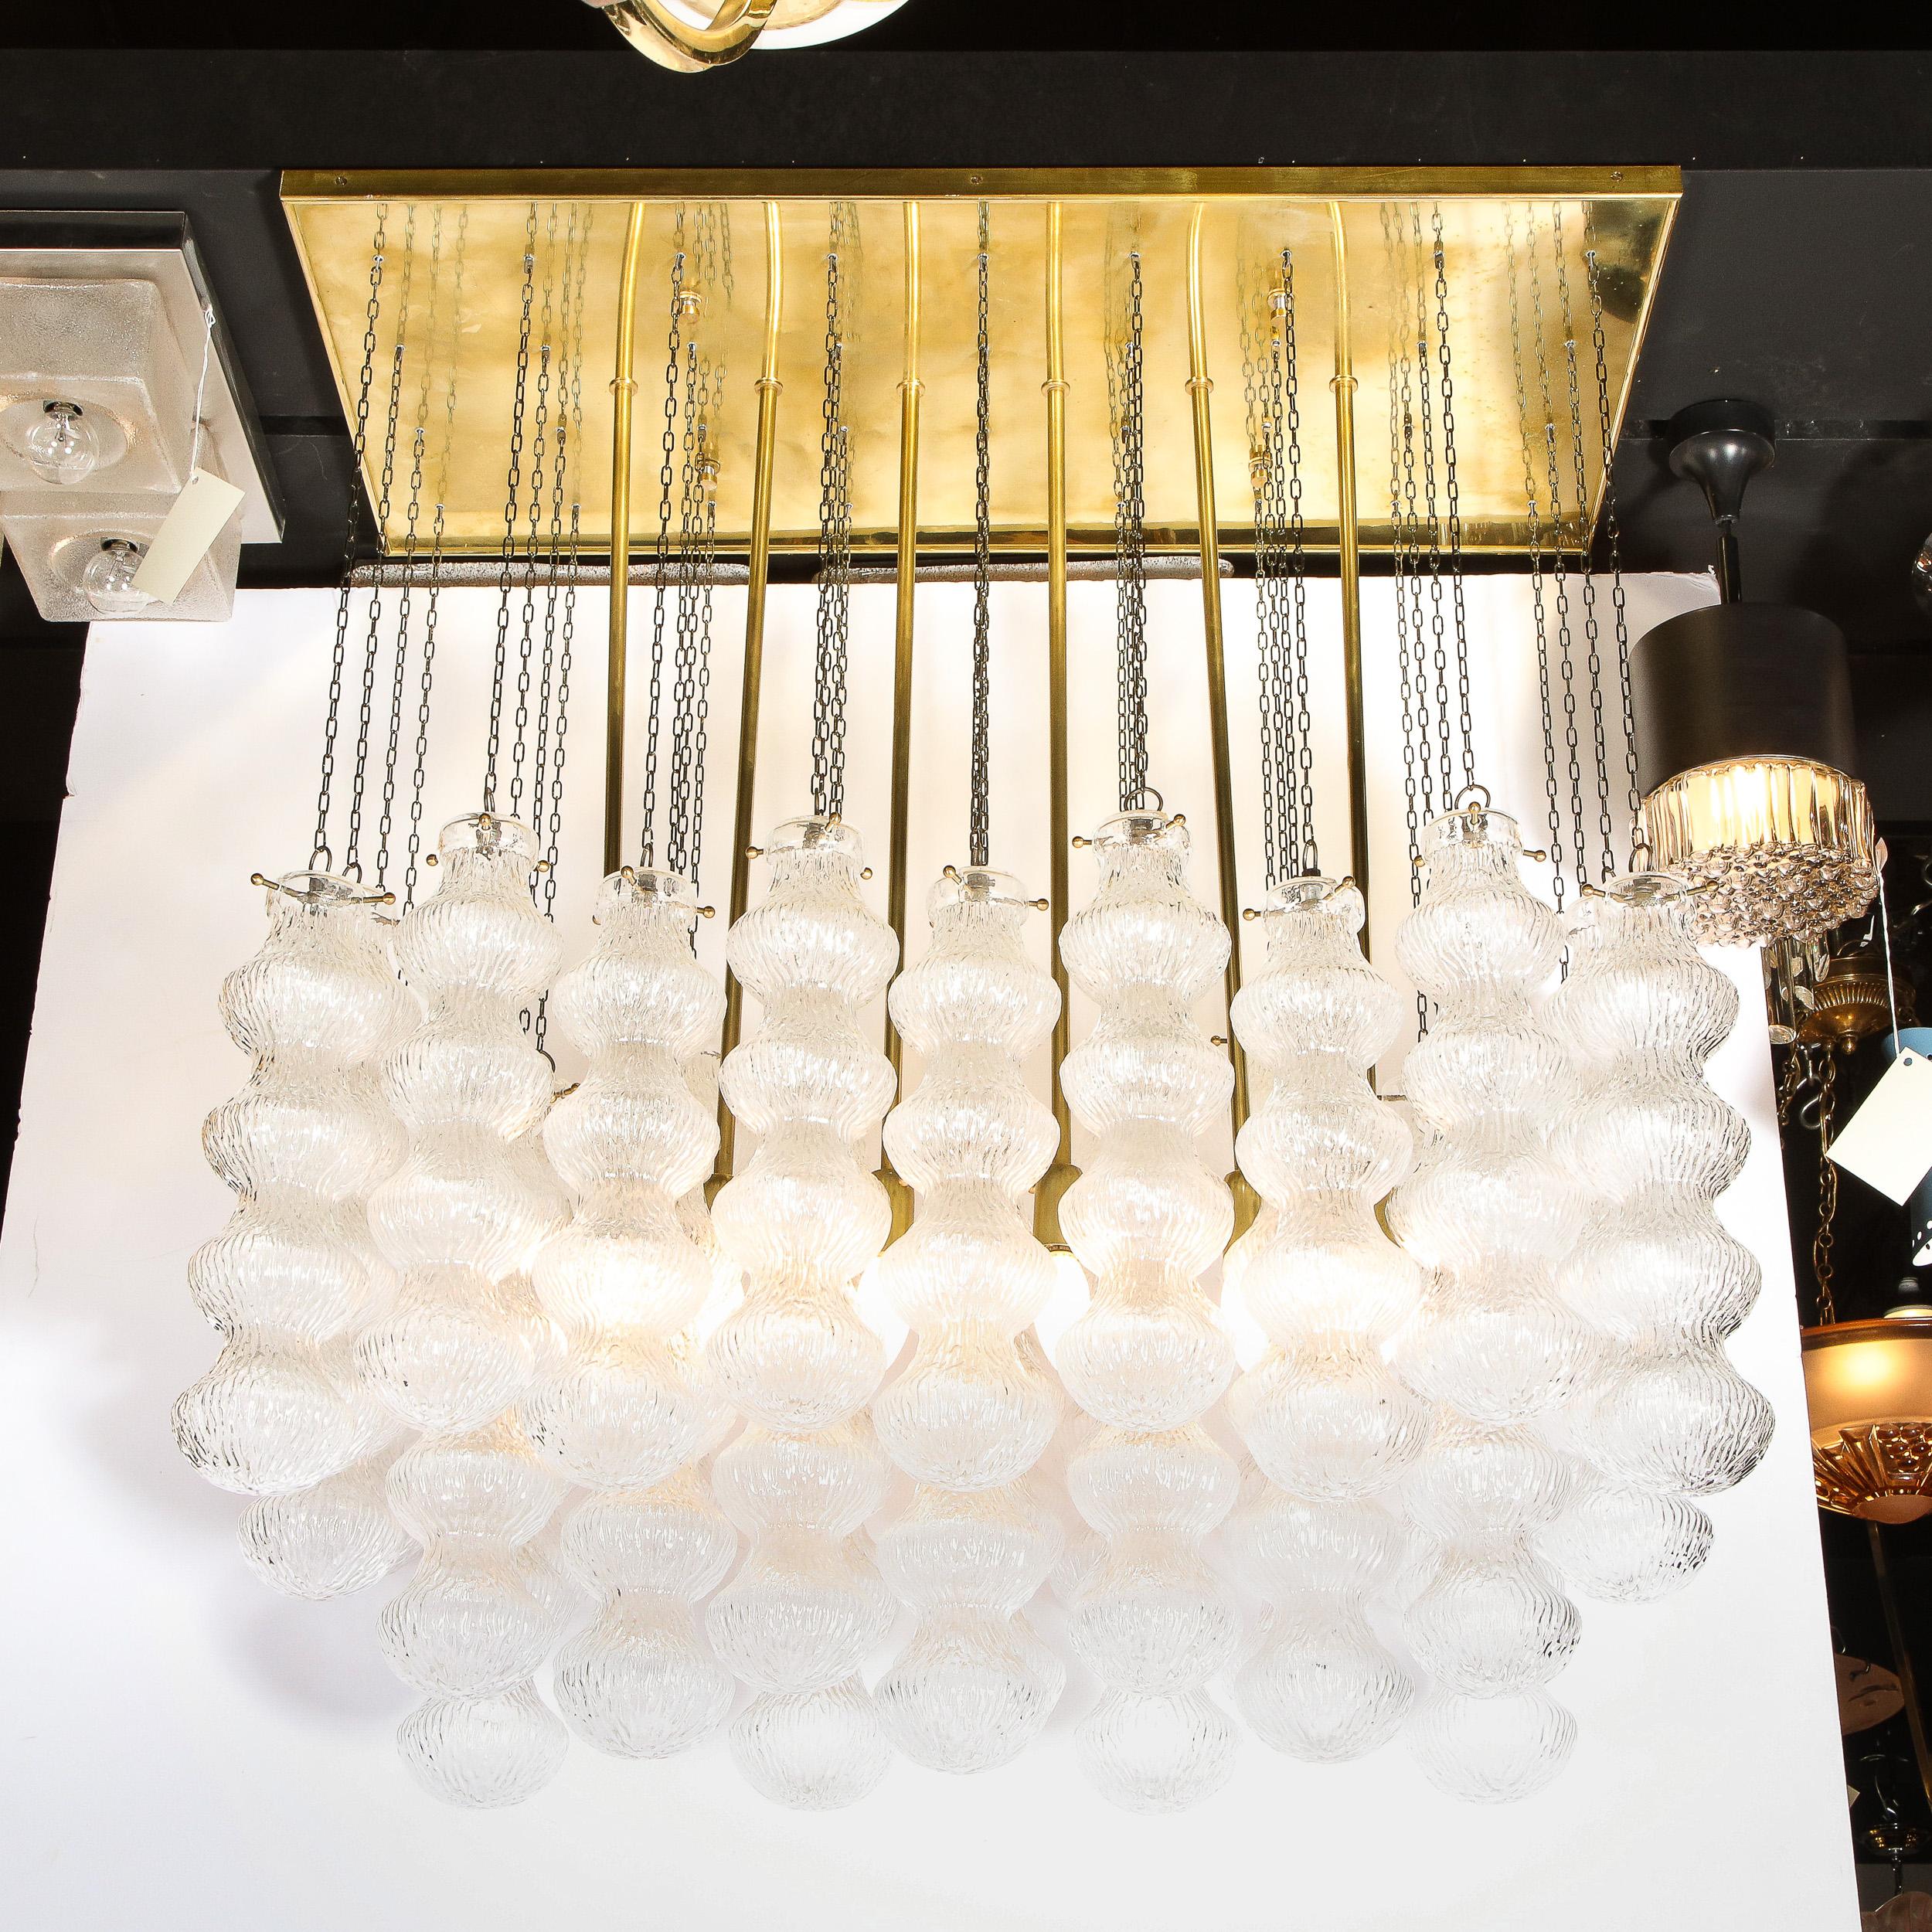 This stunning Mid-Century Modern chandelier was realized in Murano, Italy- the island off the coast of Venice renowned for centuries for its superlative glass production. It features a rectangular polished brass backplate with six cylindrical rods